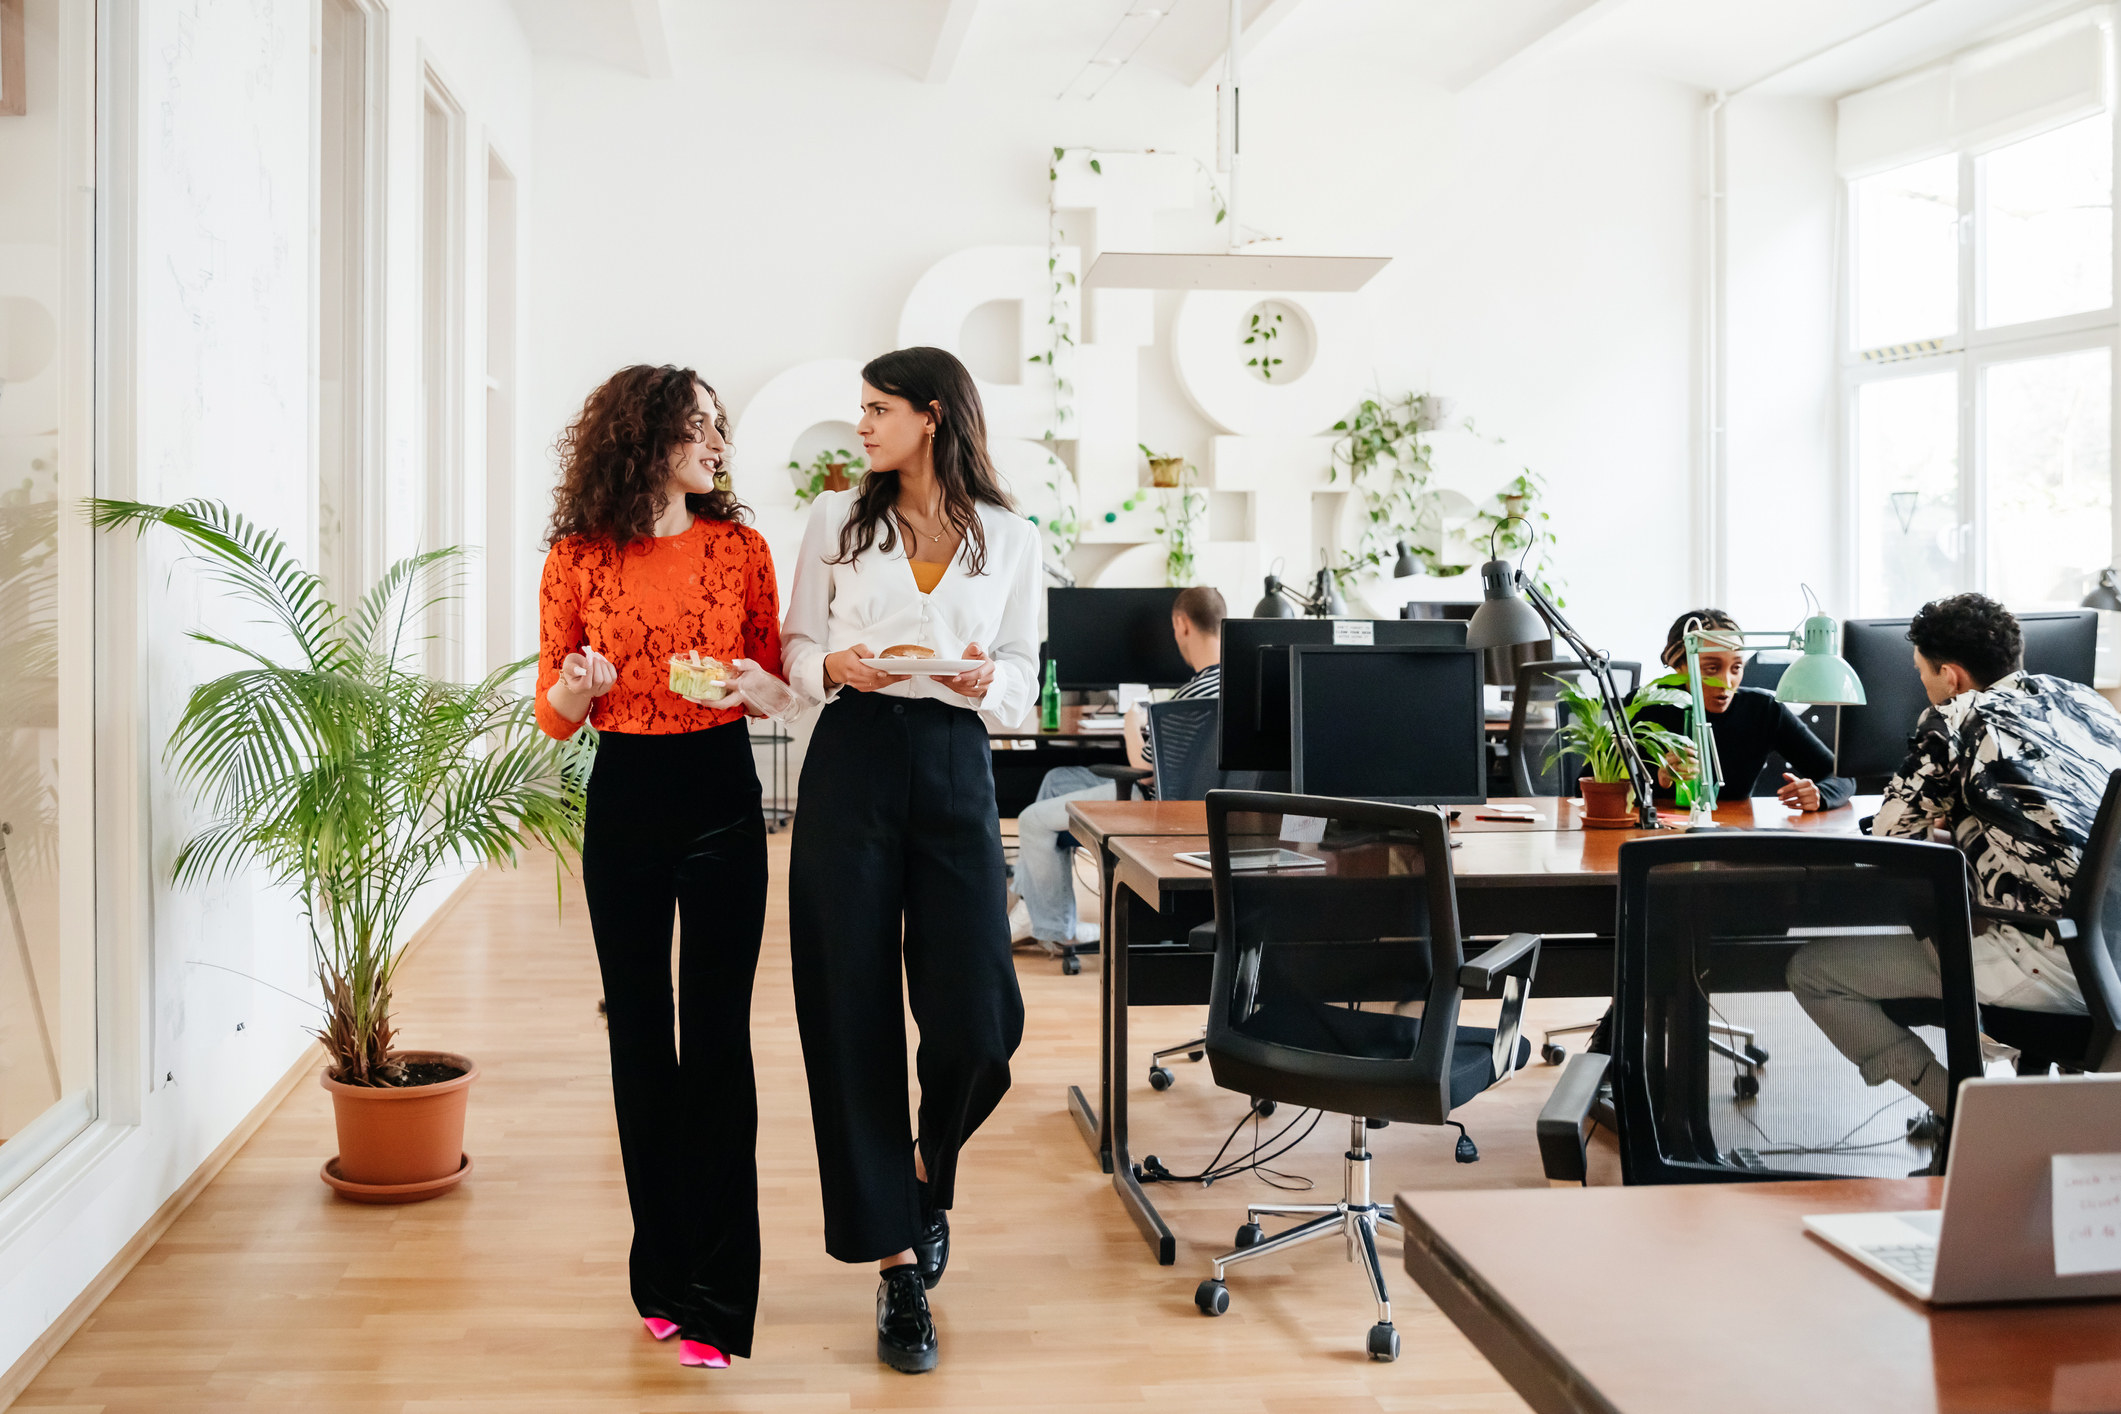 two women walking together in an office